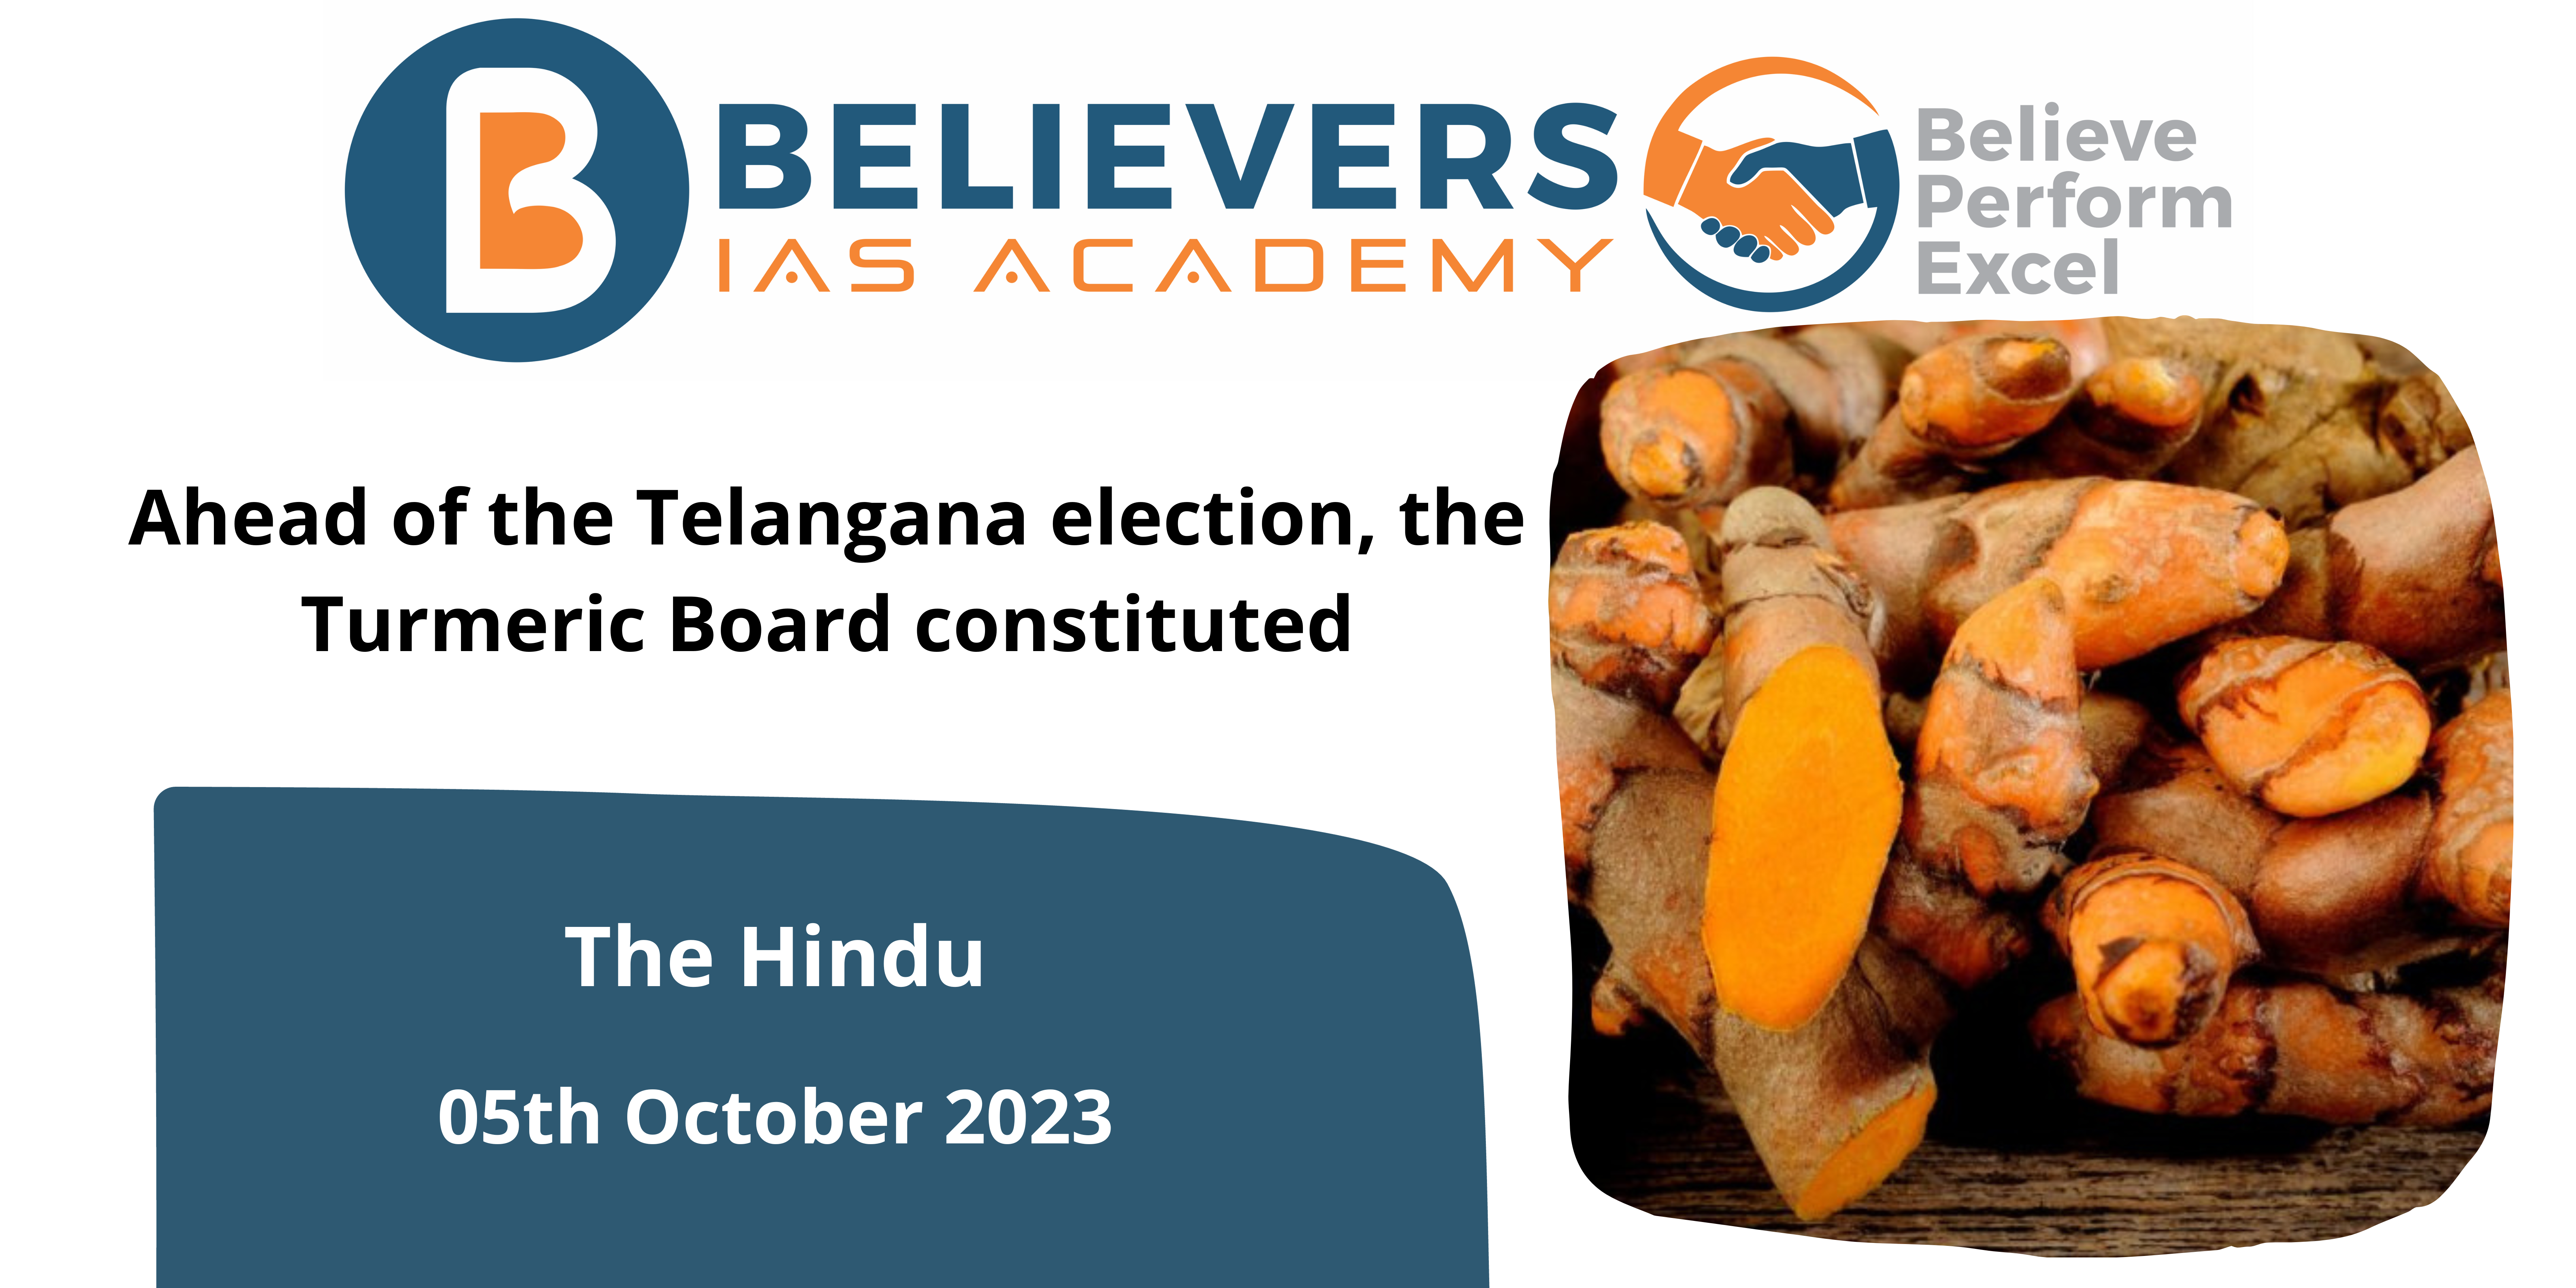 Ahead of the Telangana election, the Turmeric Board constituted